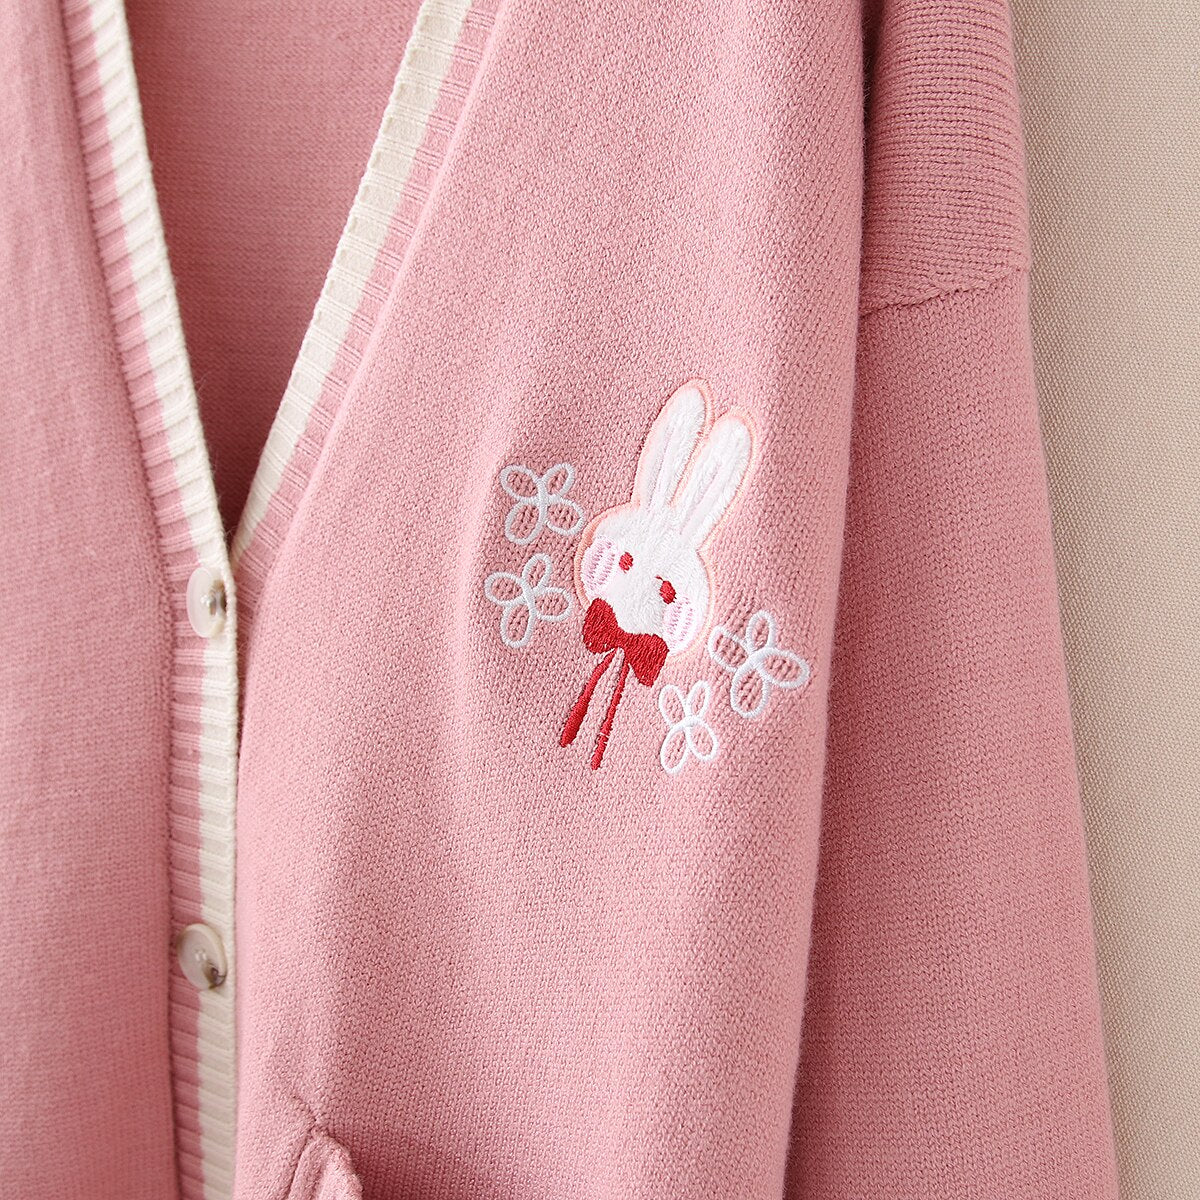 Cute Embroidered Bunny Knitted Sweater